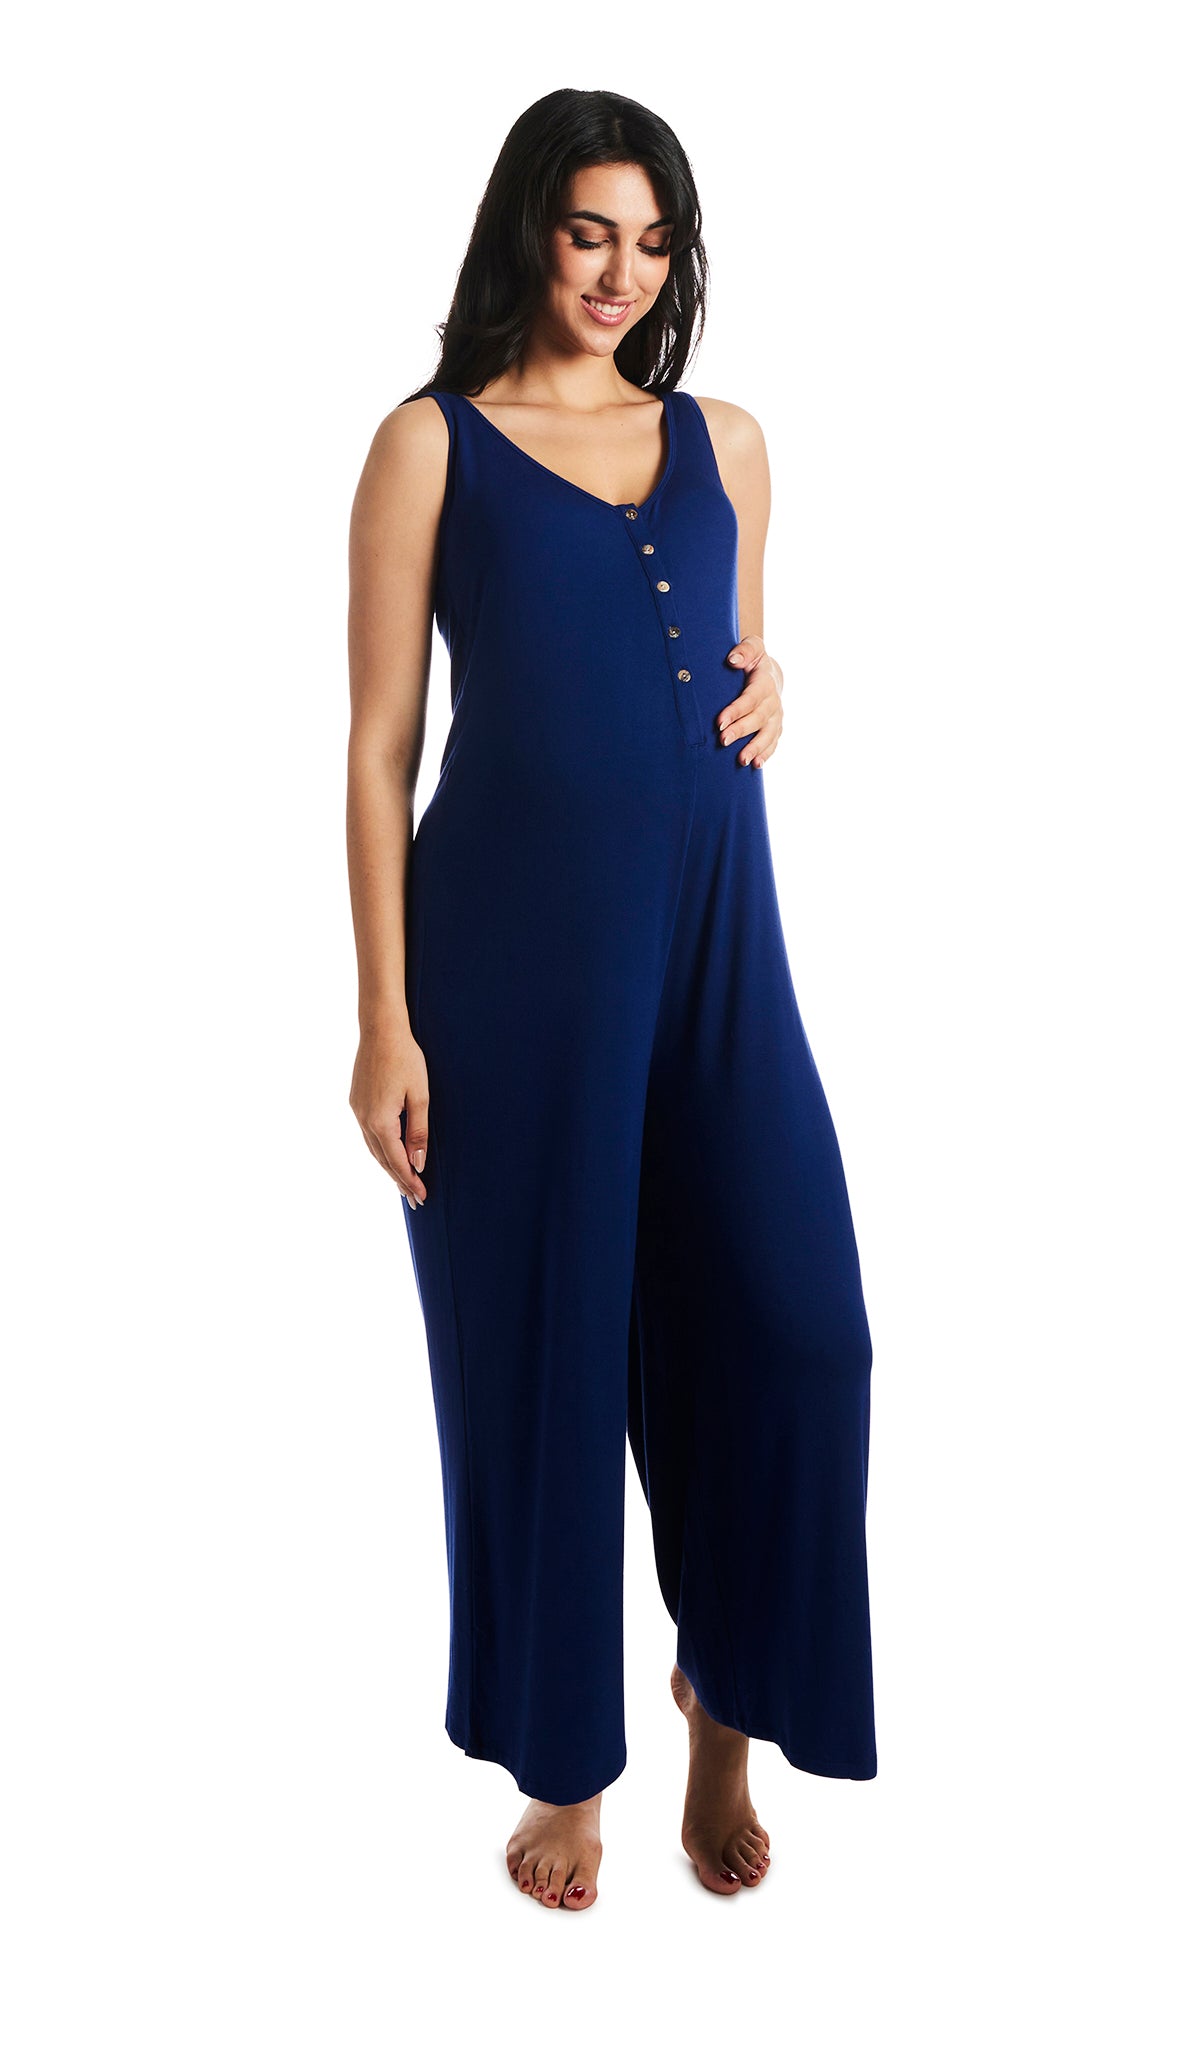 Denim Blue Luana romper. Pregnant woman looking down with one hand on belly, wearing sleeveless wide-leg romper with scoop-neckline with button-front placket. 